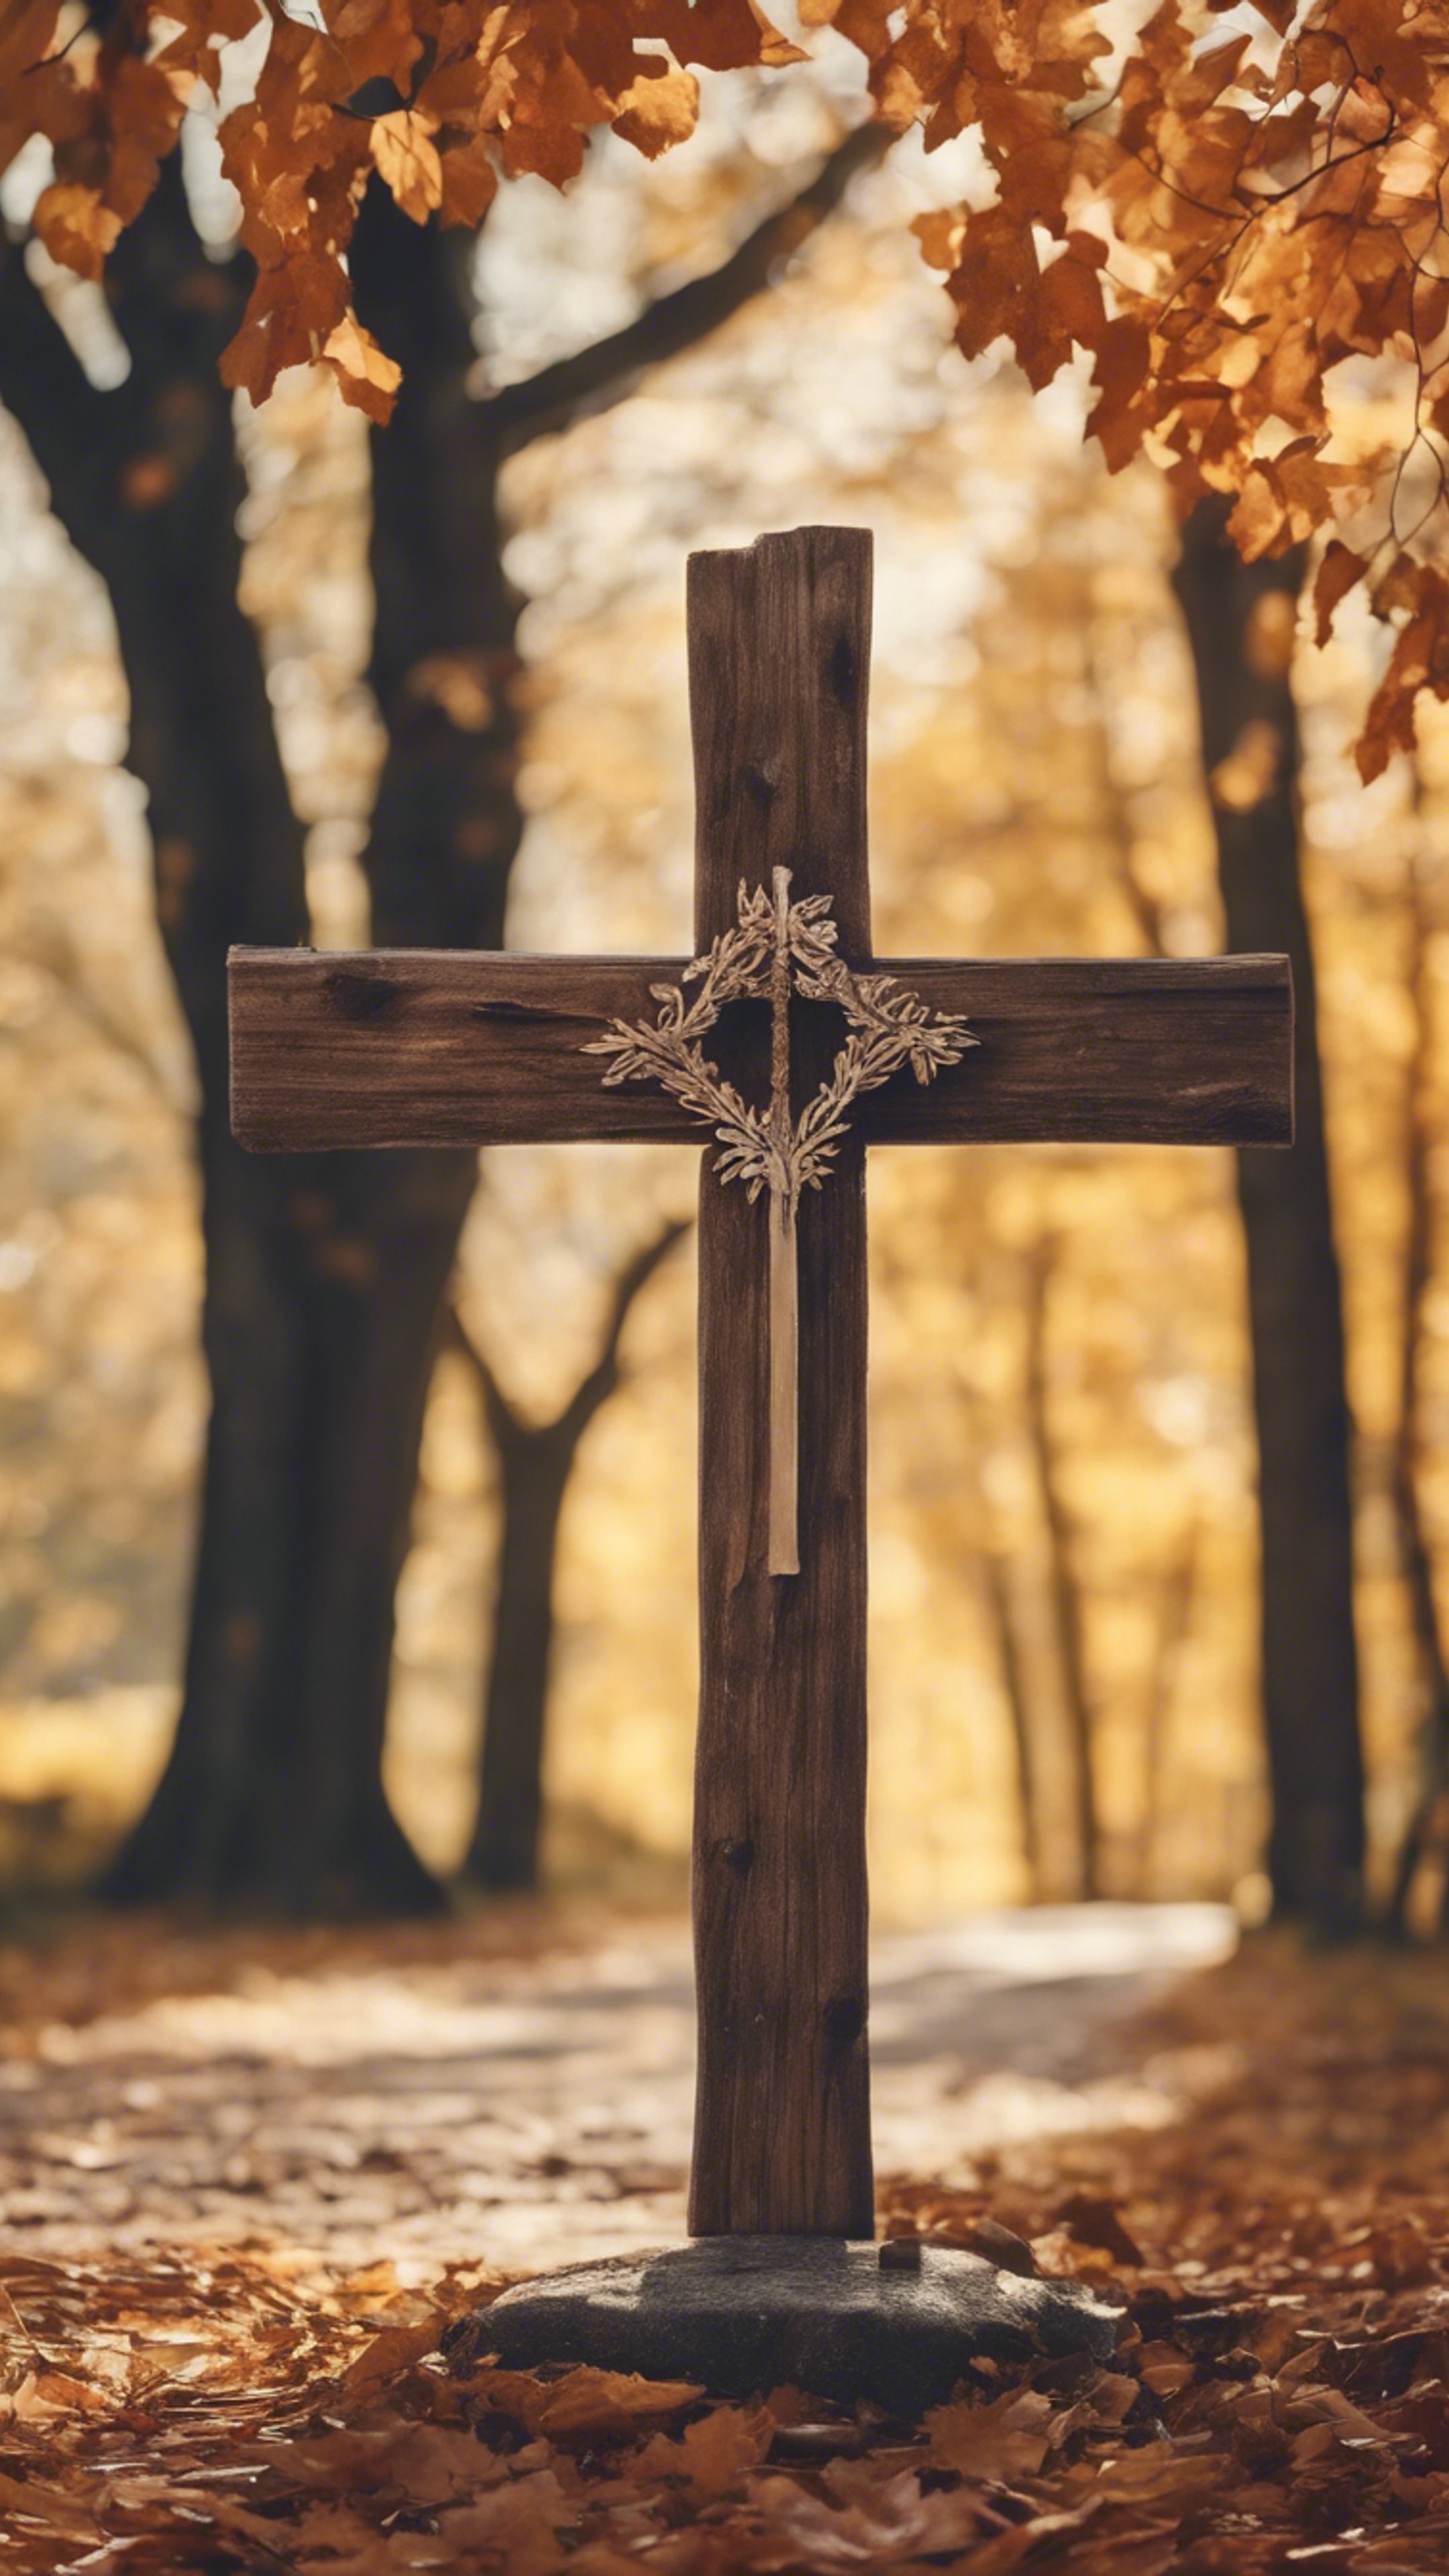 A rustic wooden cross standing by a country road, surrounded by autumn leaves. 墙纸[8ef87987617941c481d6]